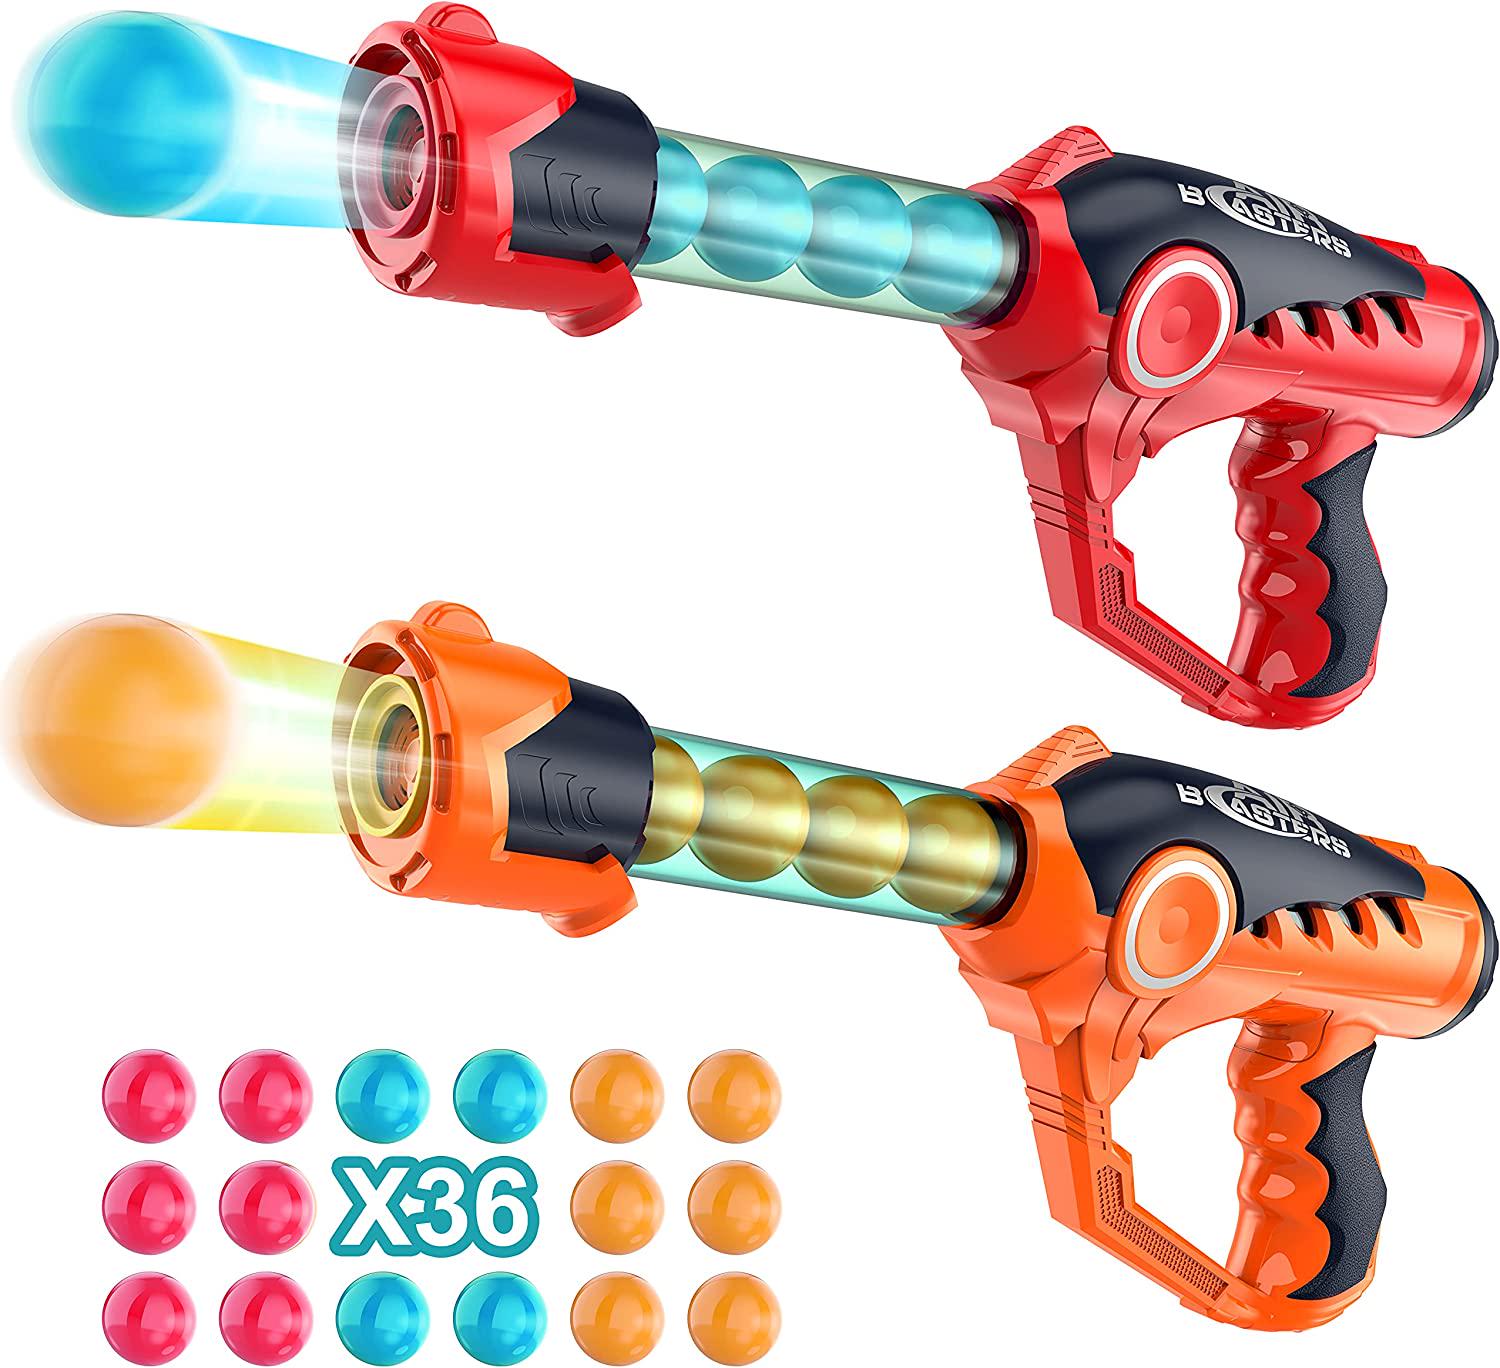 LUKAT, LUKAT Shooting Game Toy for Age 6, 7, 8, 9, 10+ Years Old Kids, Girls, Boys - Foam Ball Popper Air Guns Toy and 36 Foam Bullet Balls, Sniper Kids Gun Toy Indoor Outdoor Games, Gift Idea for Age 6-12+